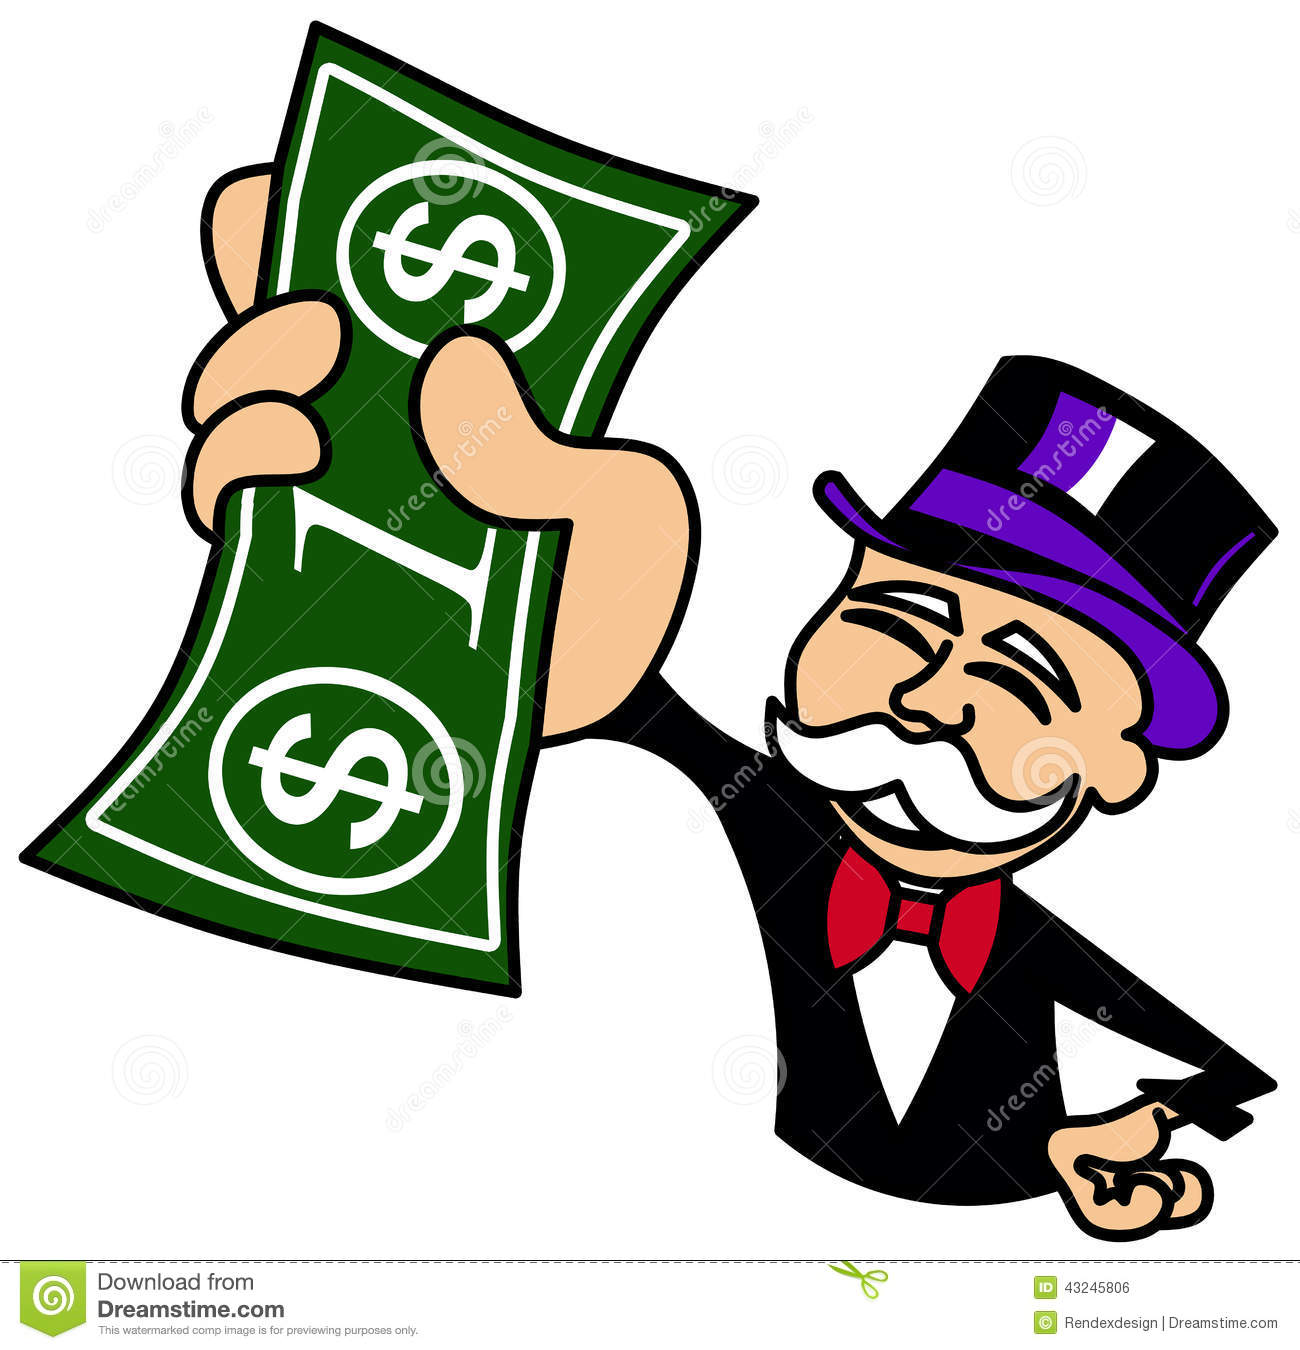 Monopoly Guy holding one dollar bill Royalty Free Stock Image